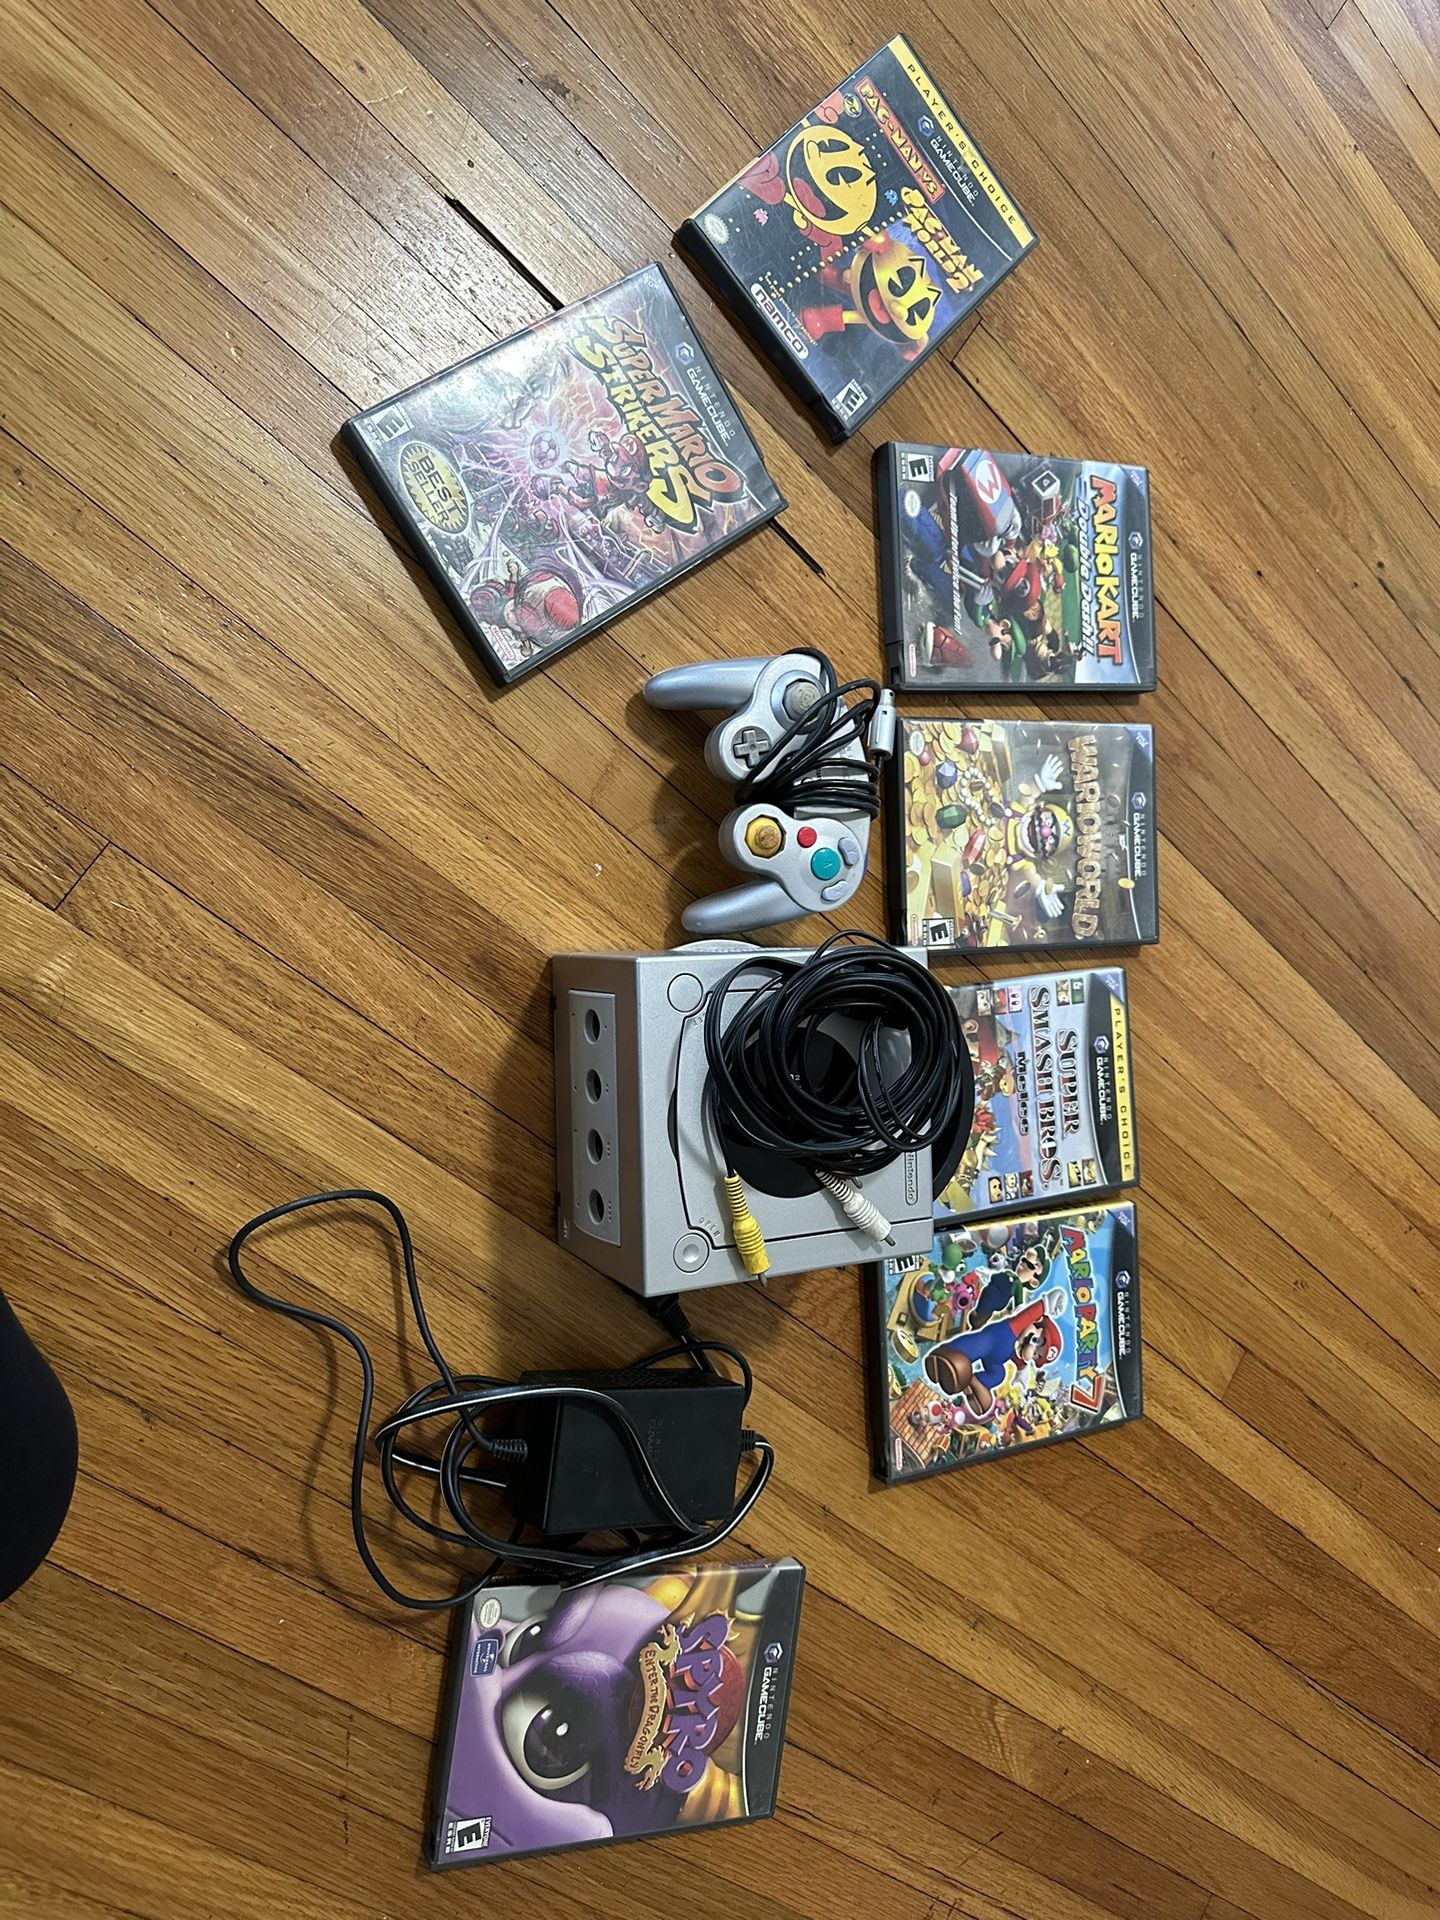 GameCube System With Games